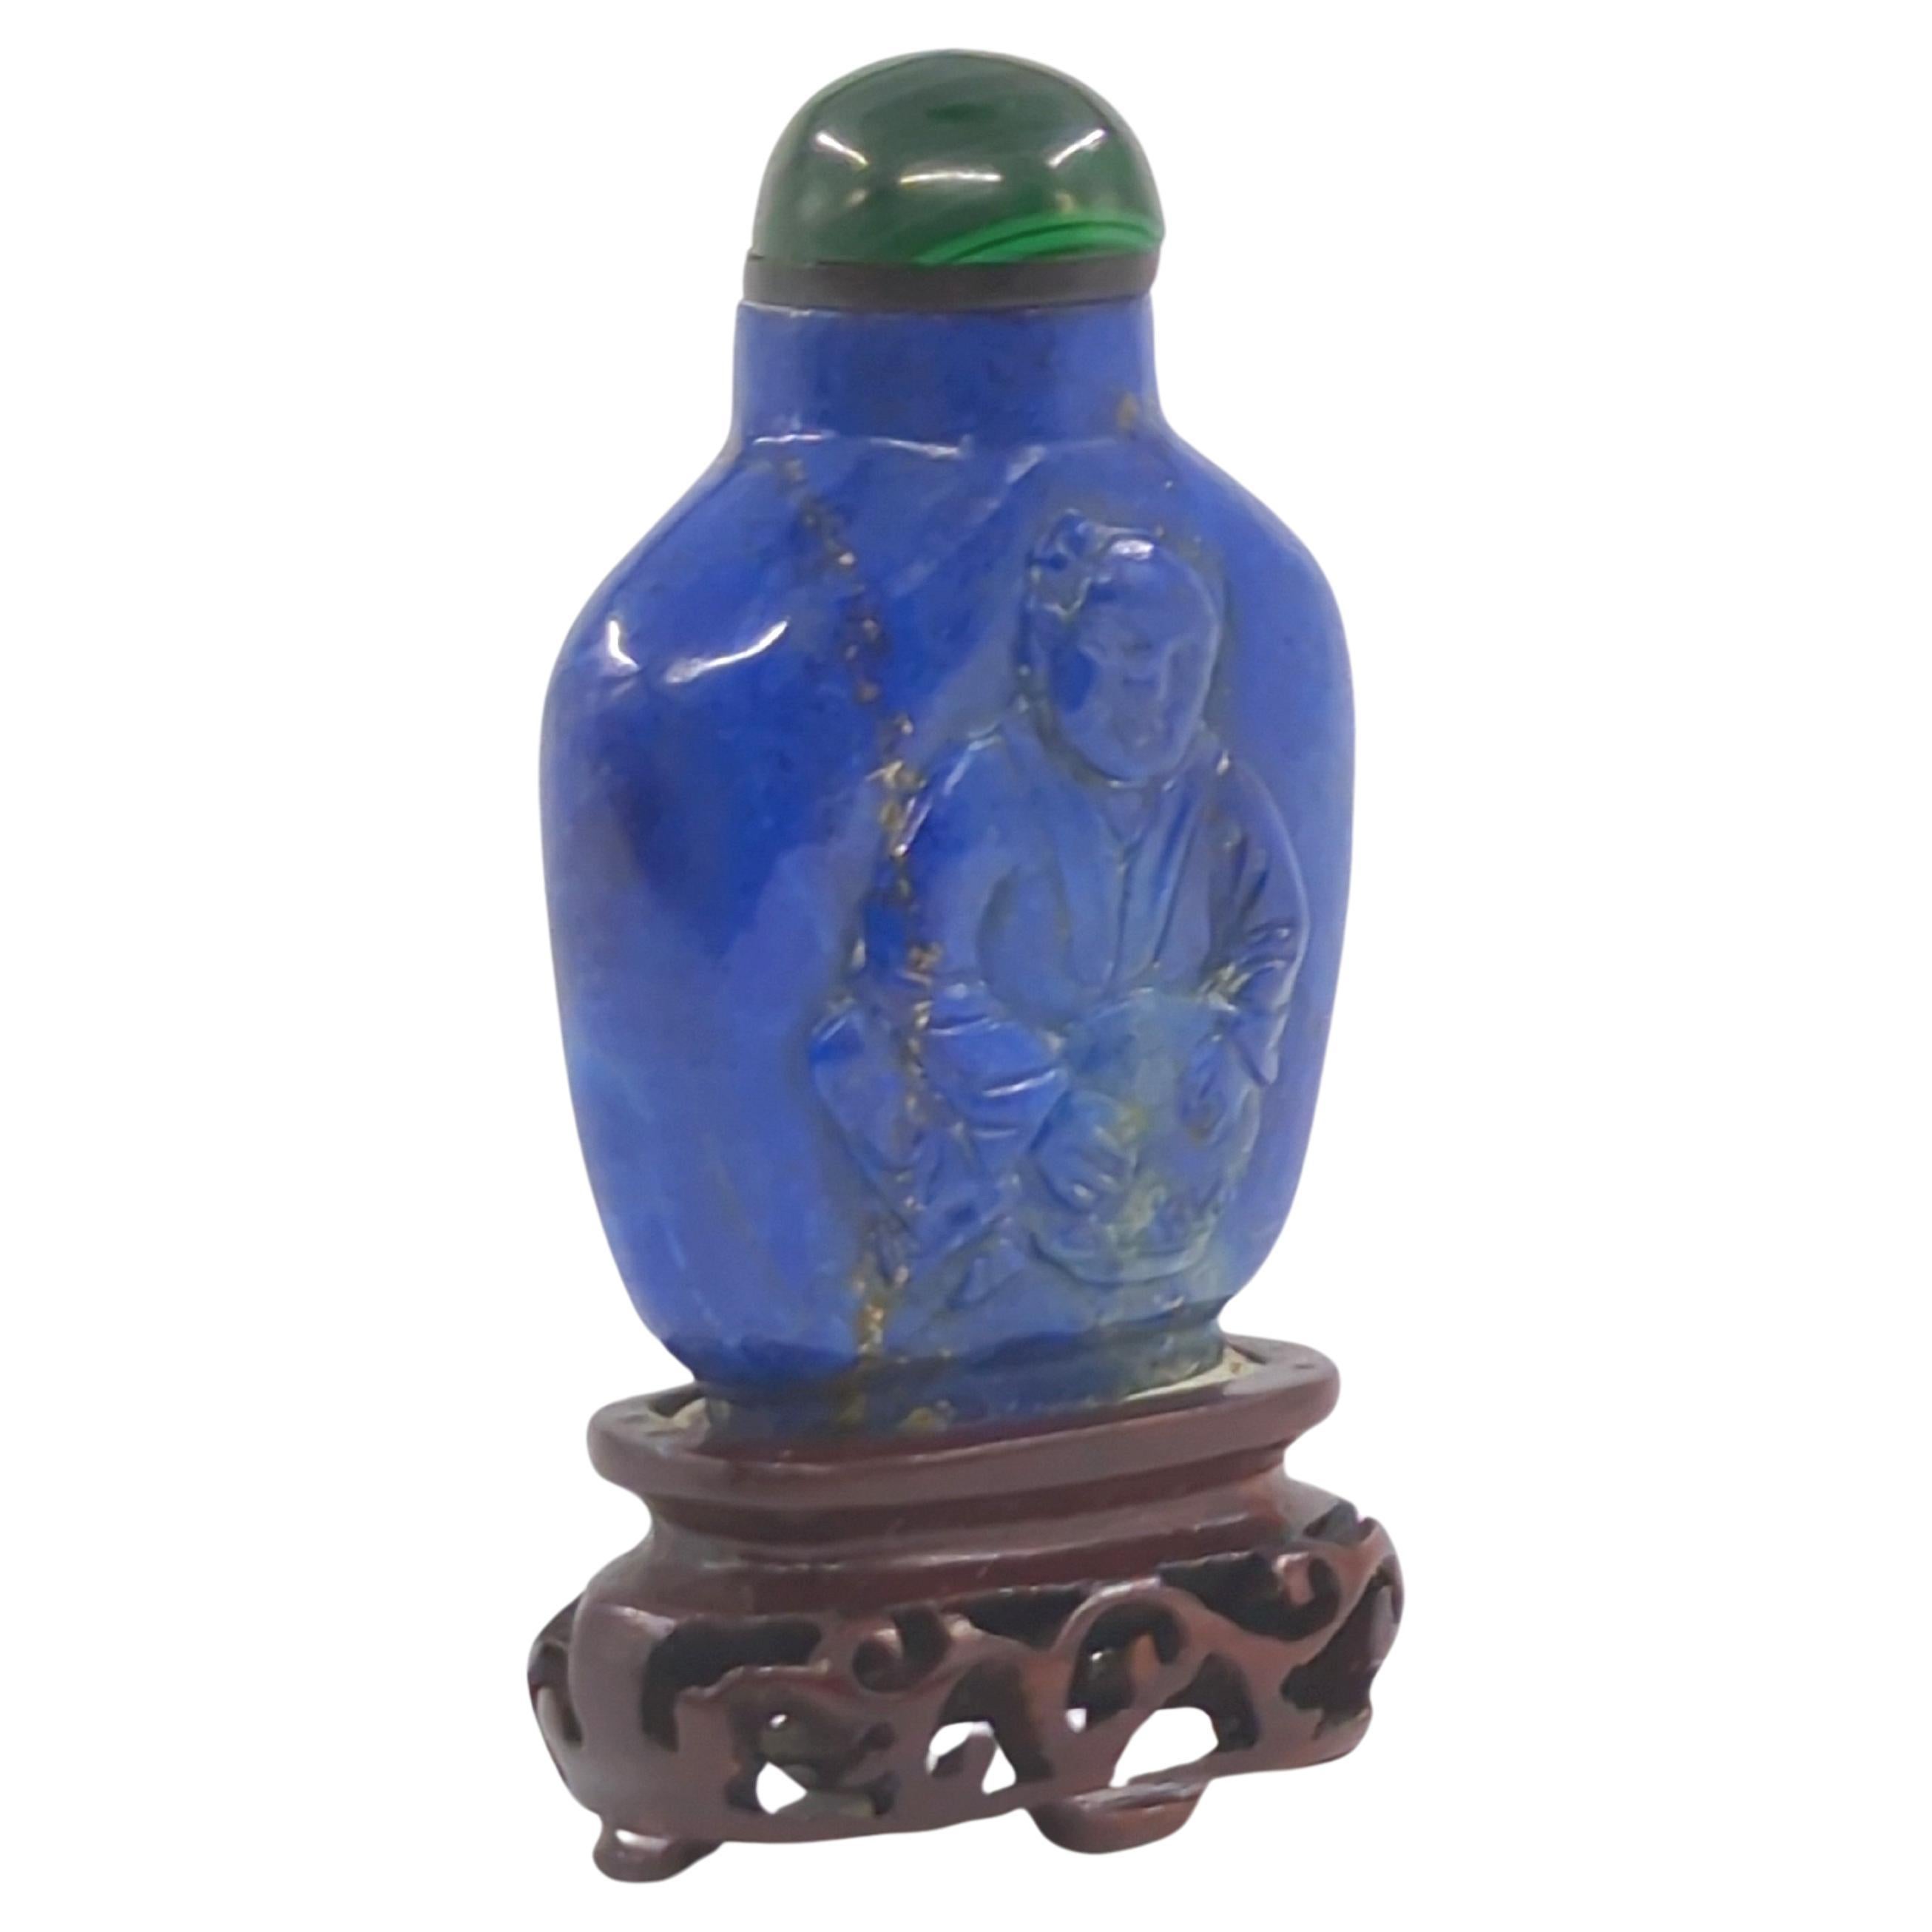 Antique Chinese Lapis Lazuli Relief Carved Snuff Bottle on Stand c.1920 For Sale 1